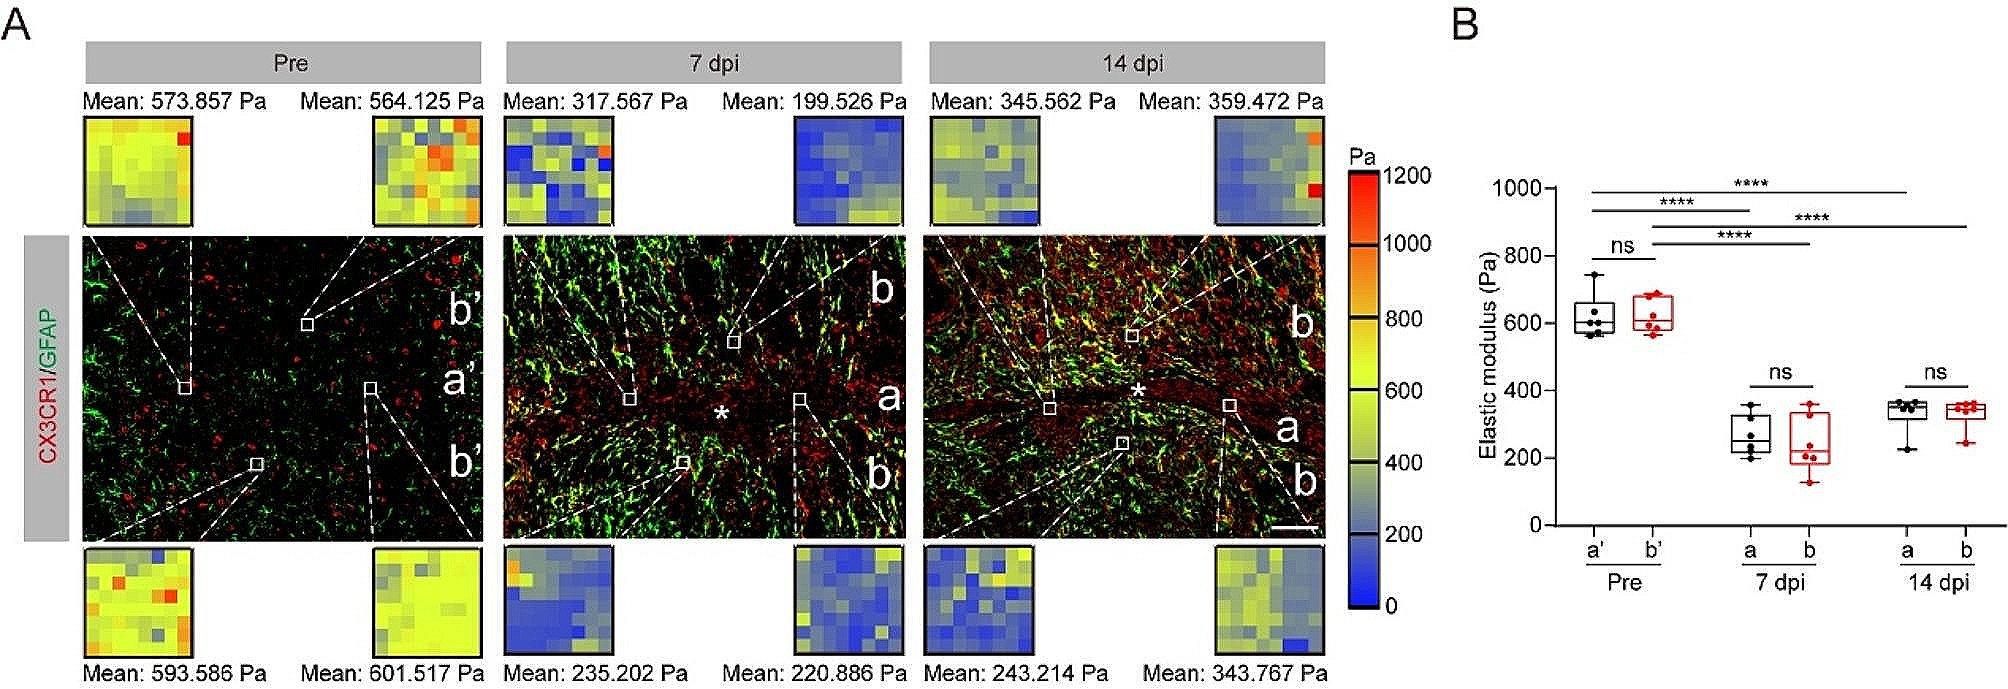 Fascin-1 limits myosin activity in microglia to control mechanical characterization of the injured spinal cord